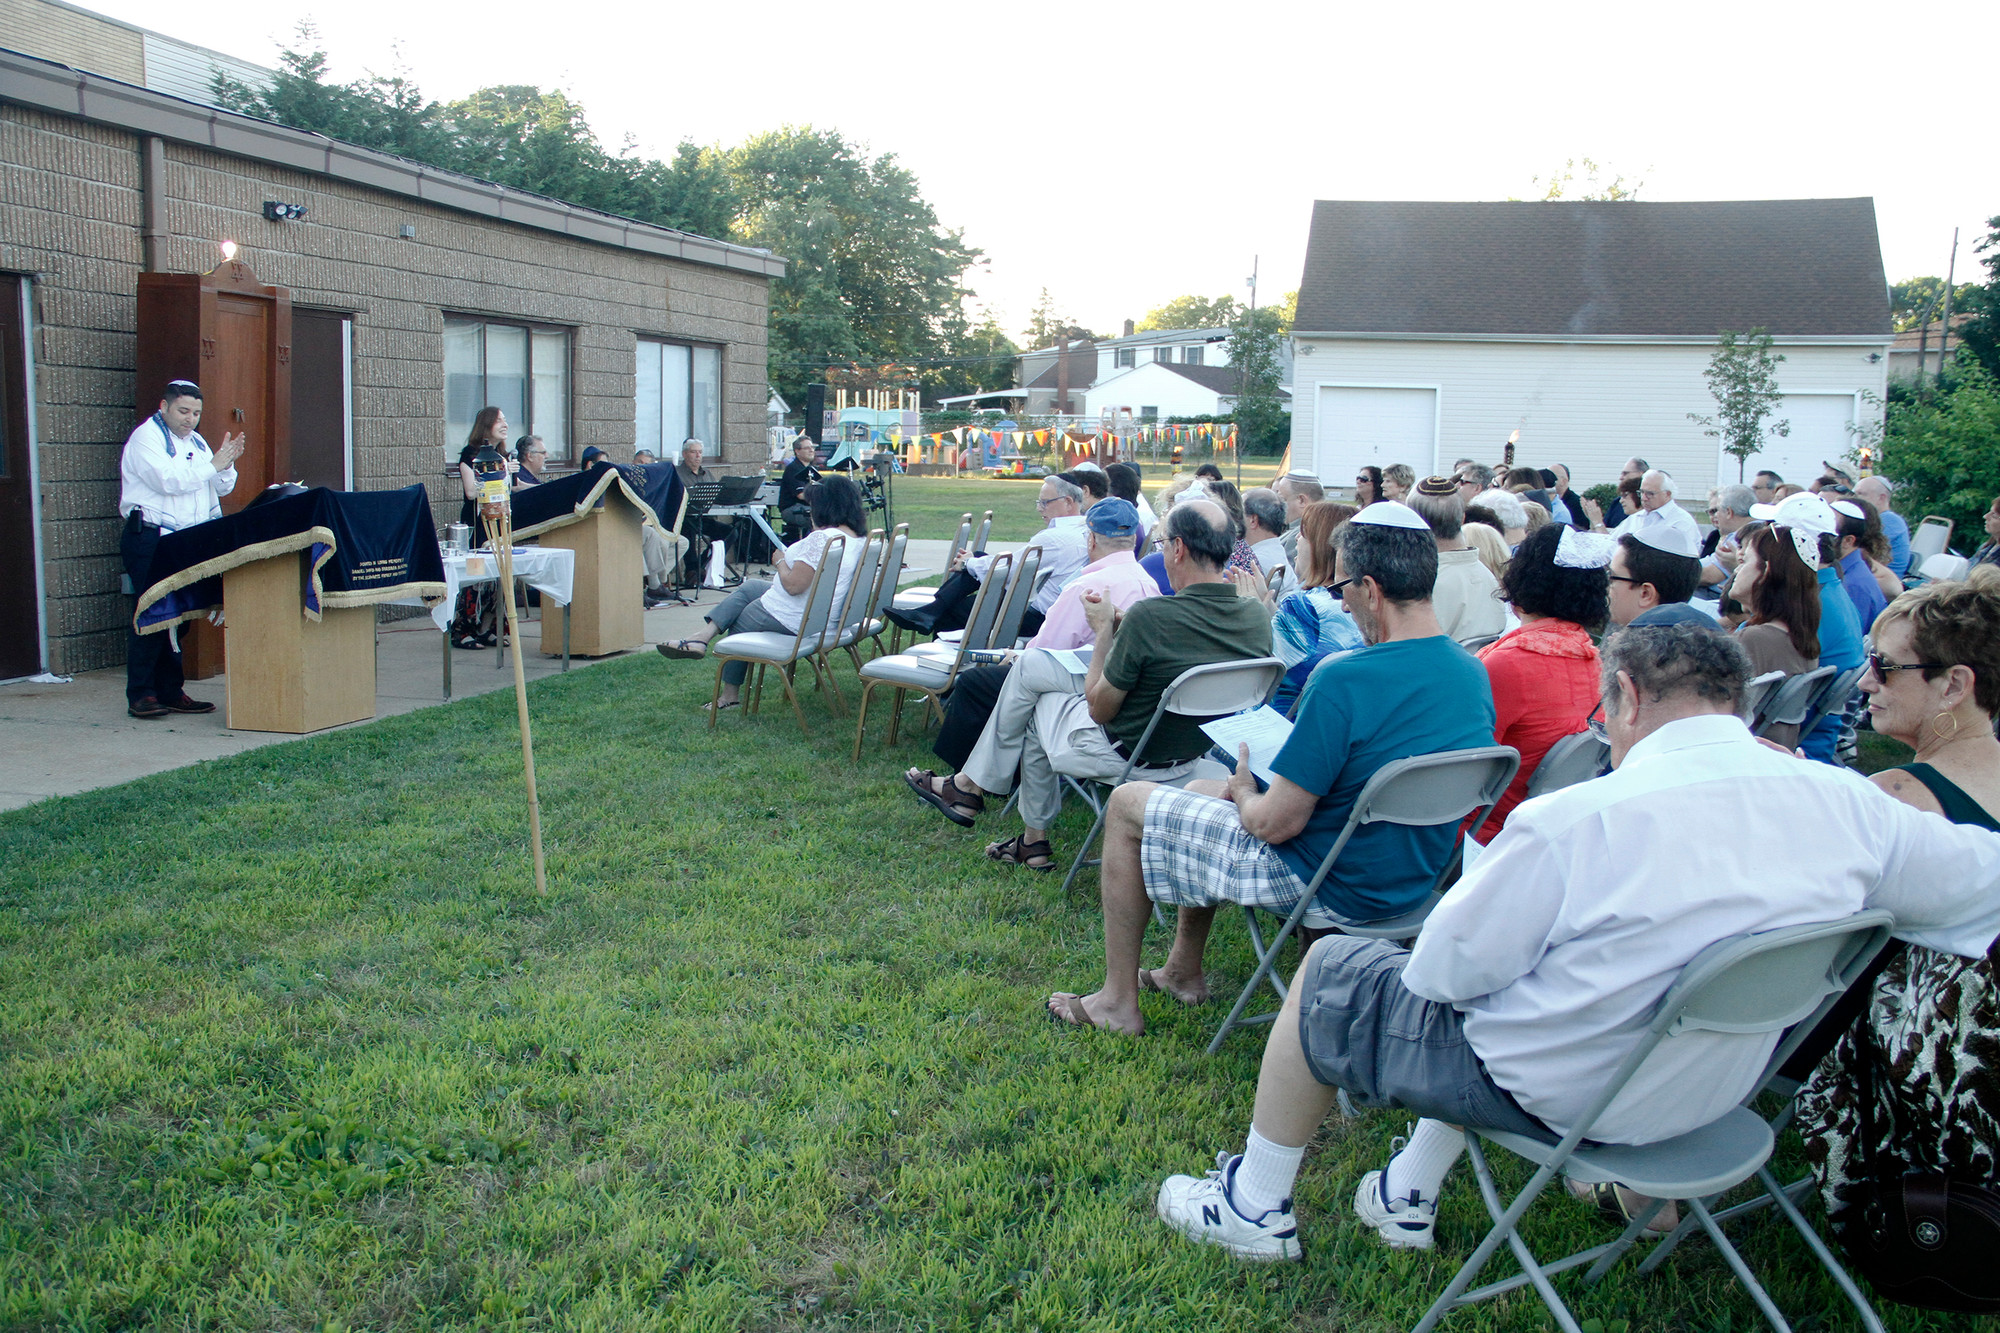 The outdoor service was held on the synagogue’s grounds, at 123   Merrick Ave., last Friday.